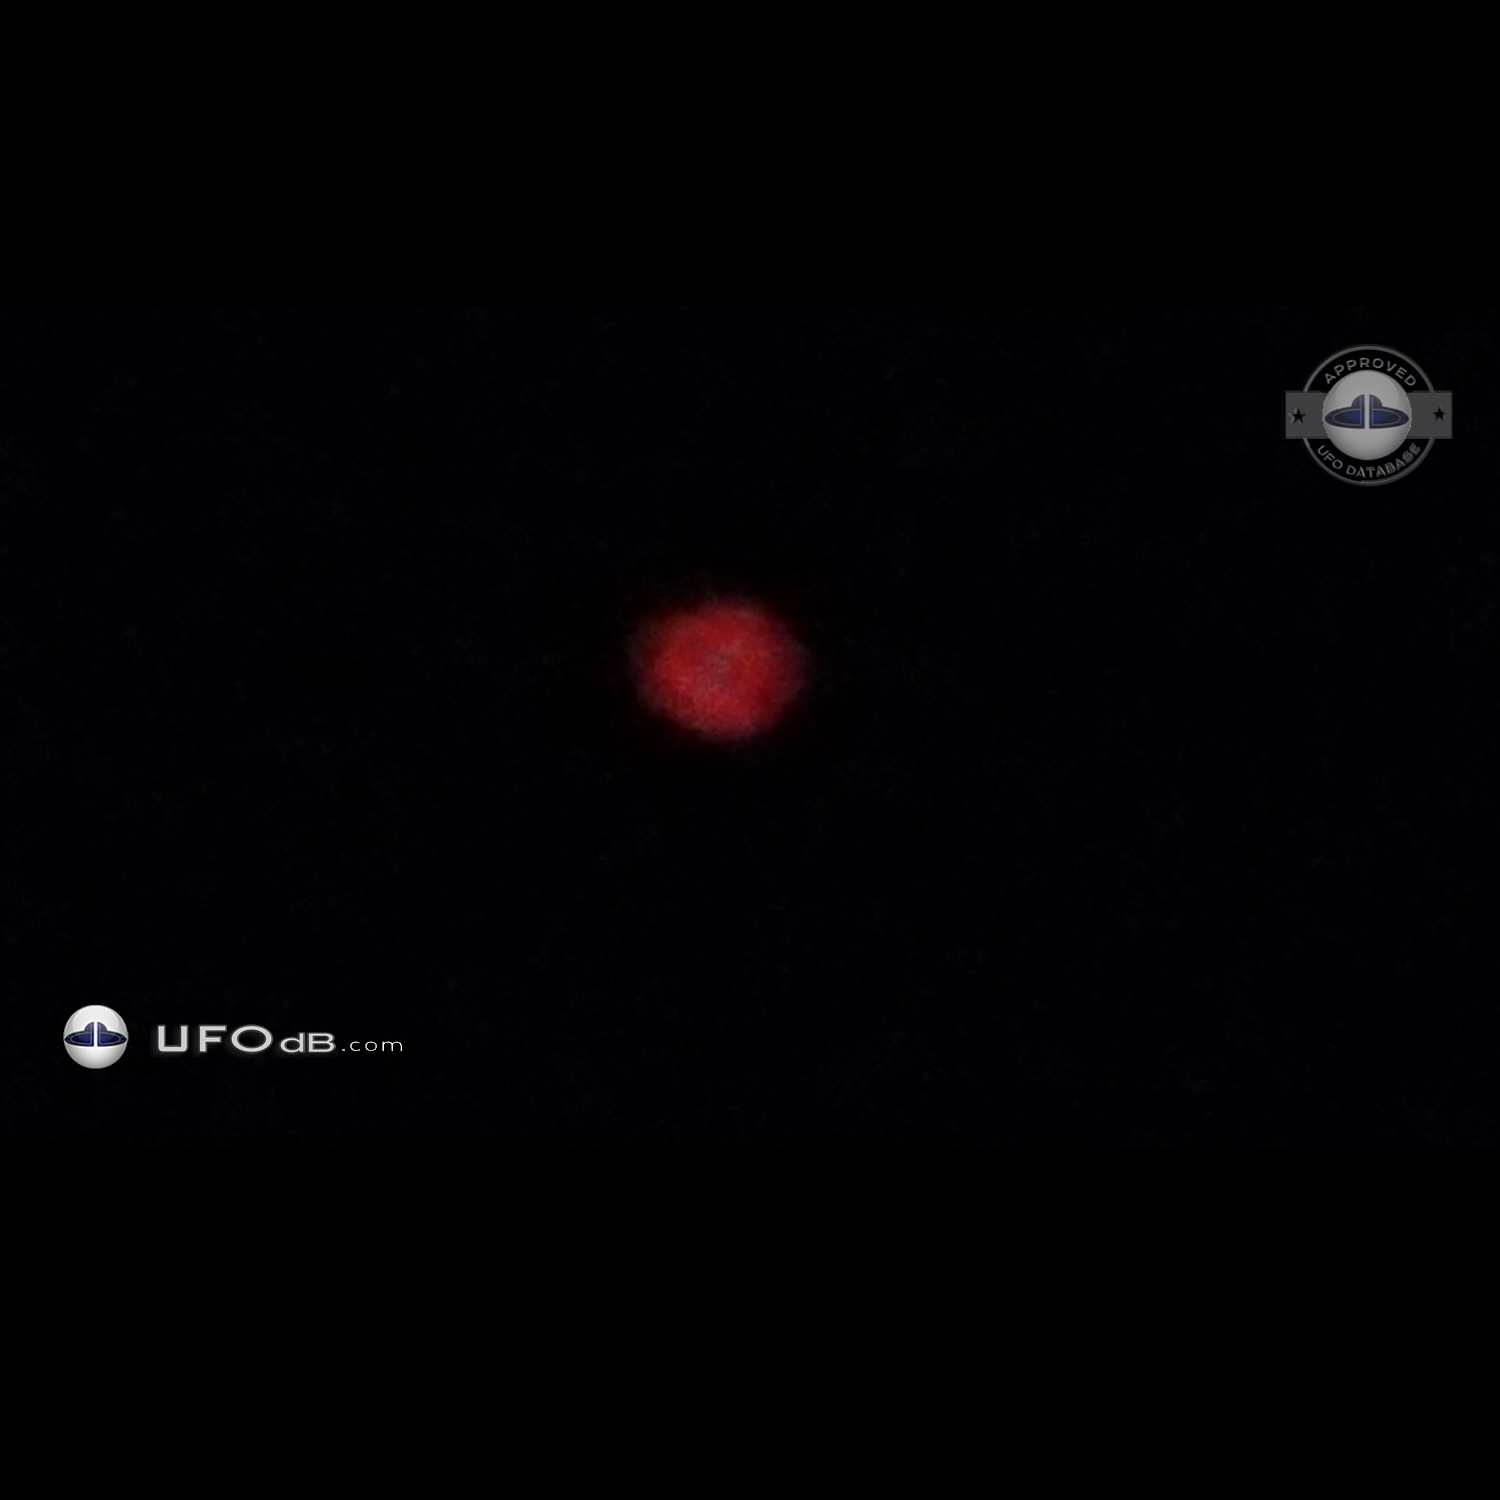 Orange silent ball UFO that moved quickly - Oadby, Leicestershire 2014 UFO Picture #666-2